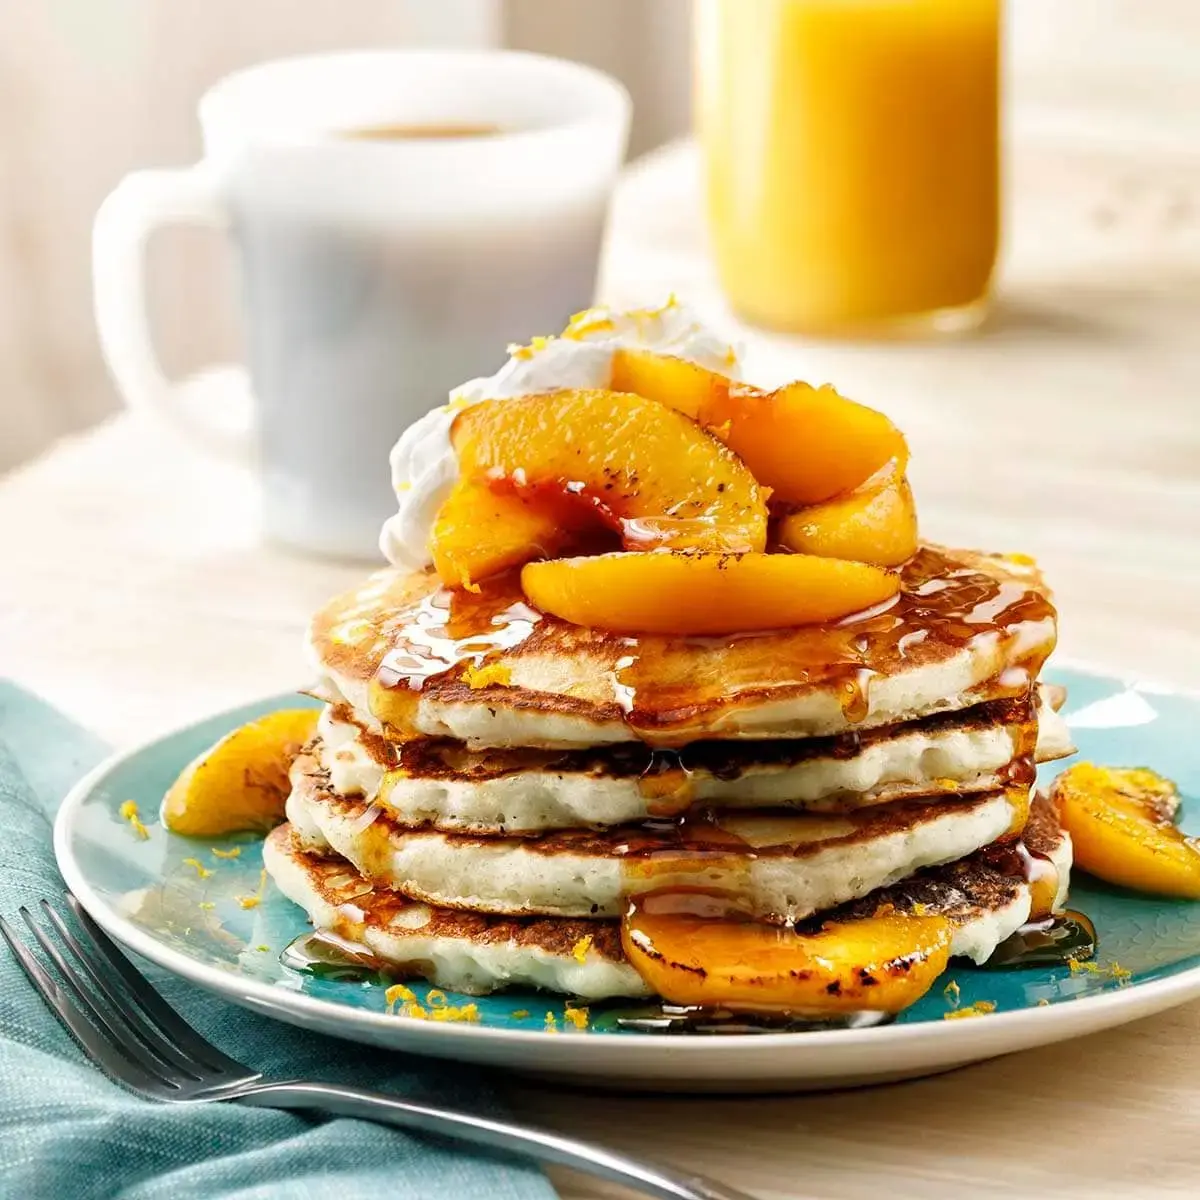 Peach and Maple Butter Bruléed Pancakes Recipe Card